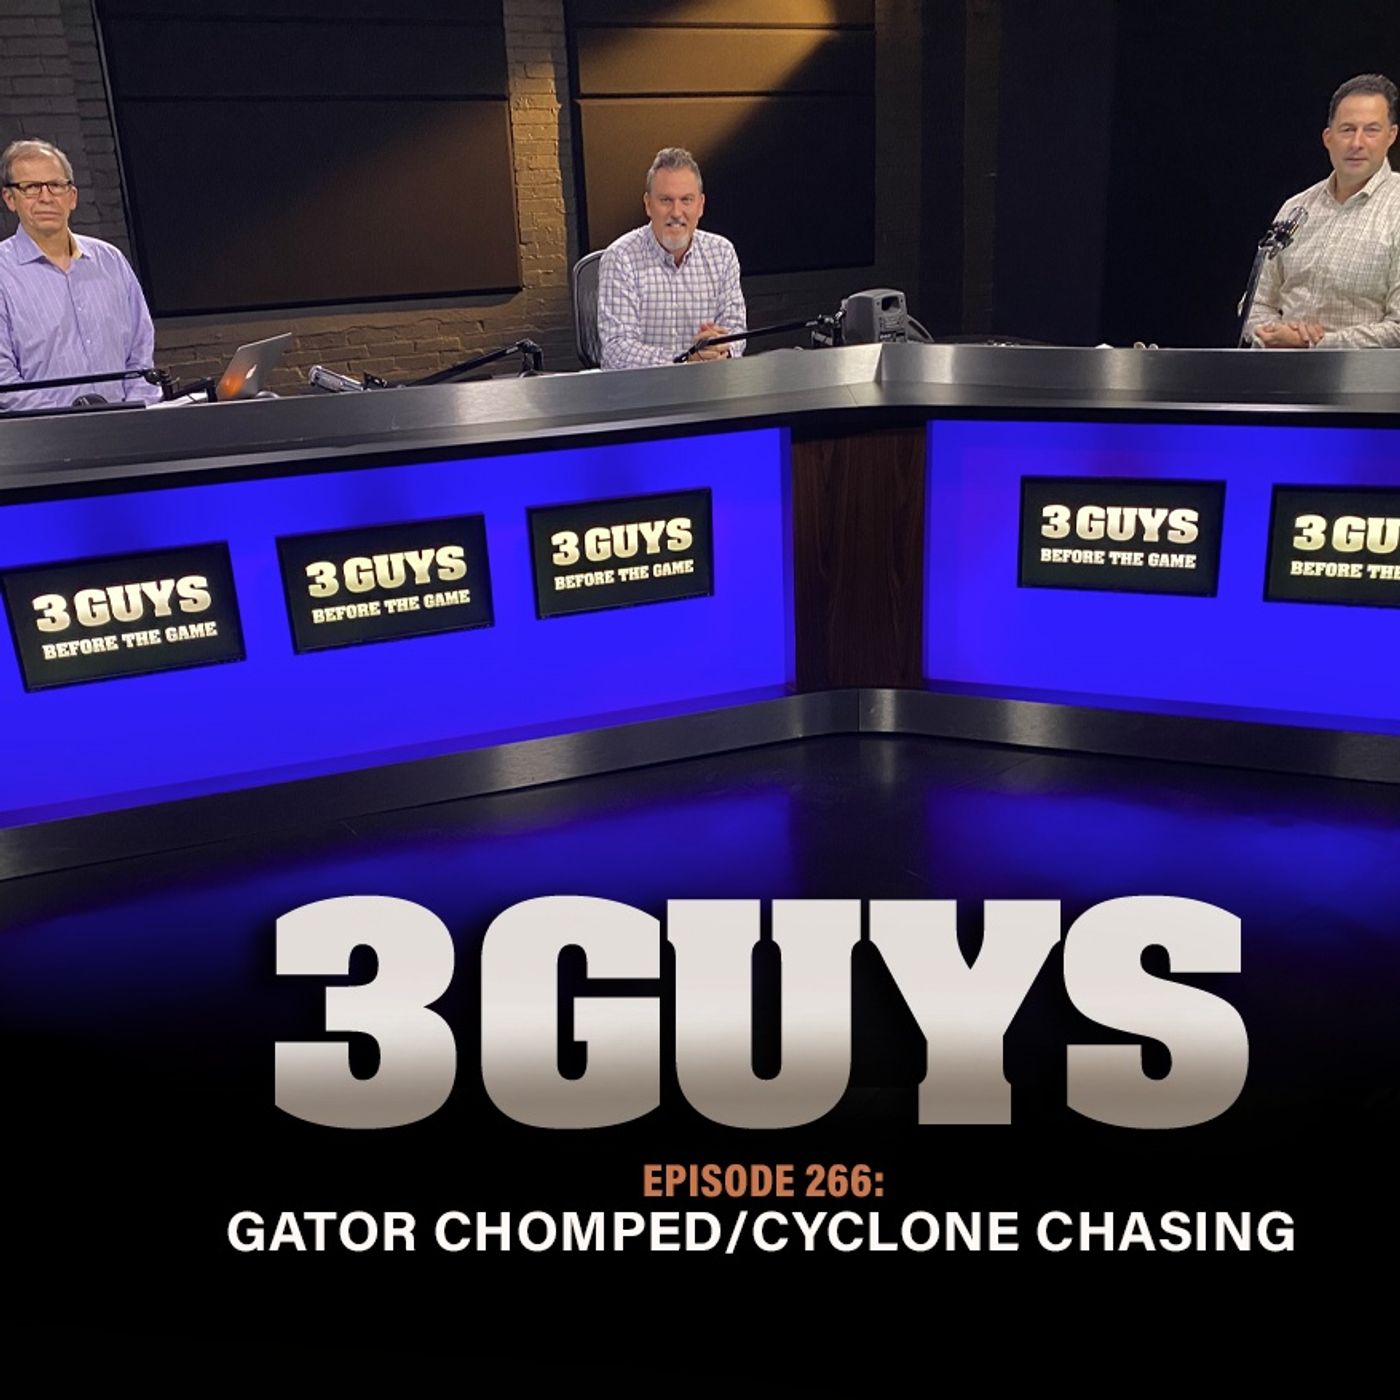 Gator Chomped and Cyclone Chasing with Tony Caridi, Brad Howe and Hoppy Kercheval